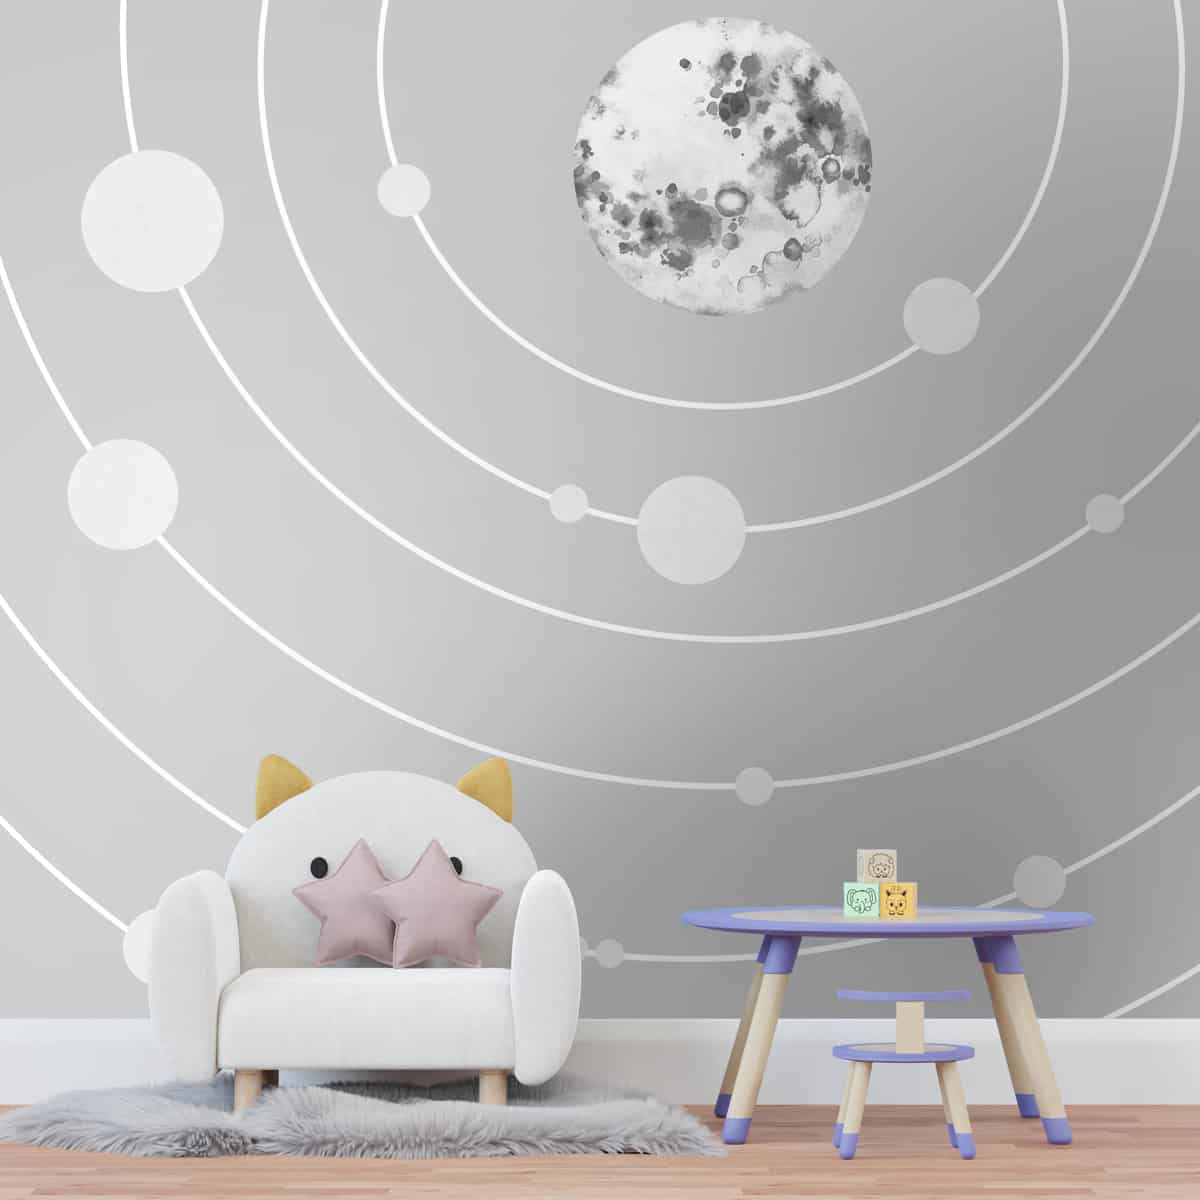 Galaxy theme wall mural for kids room